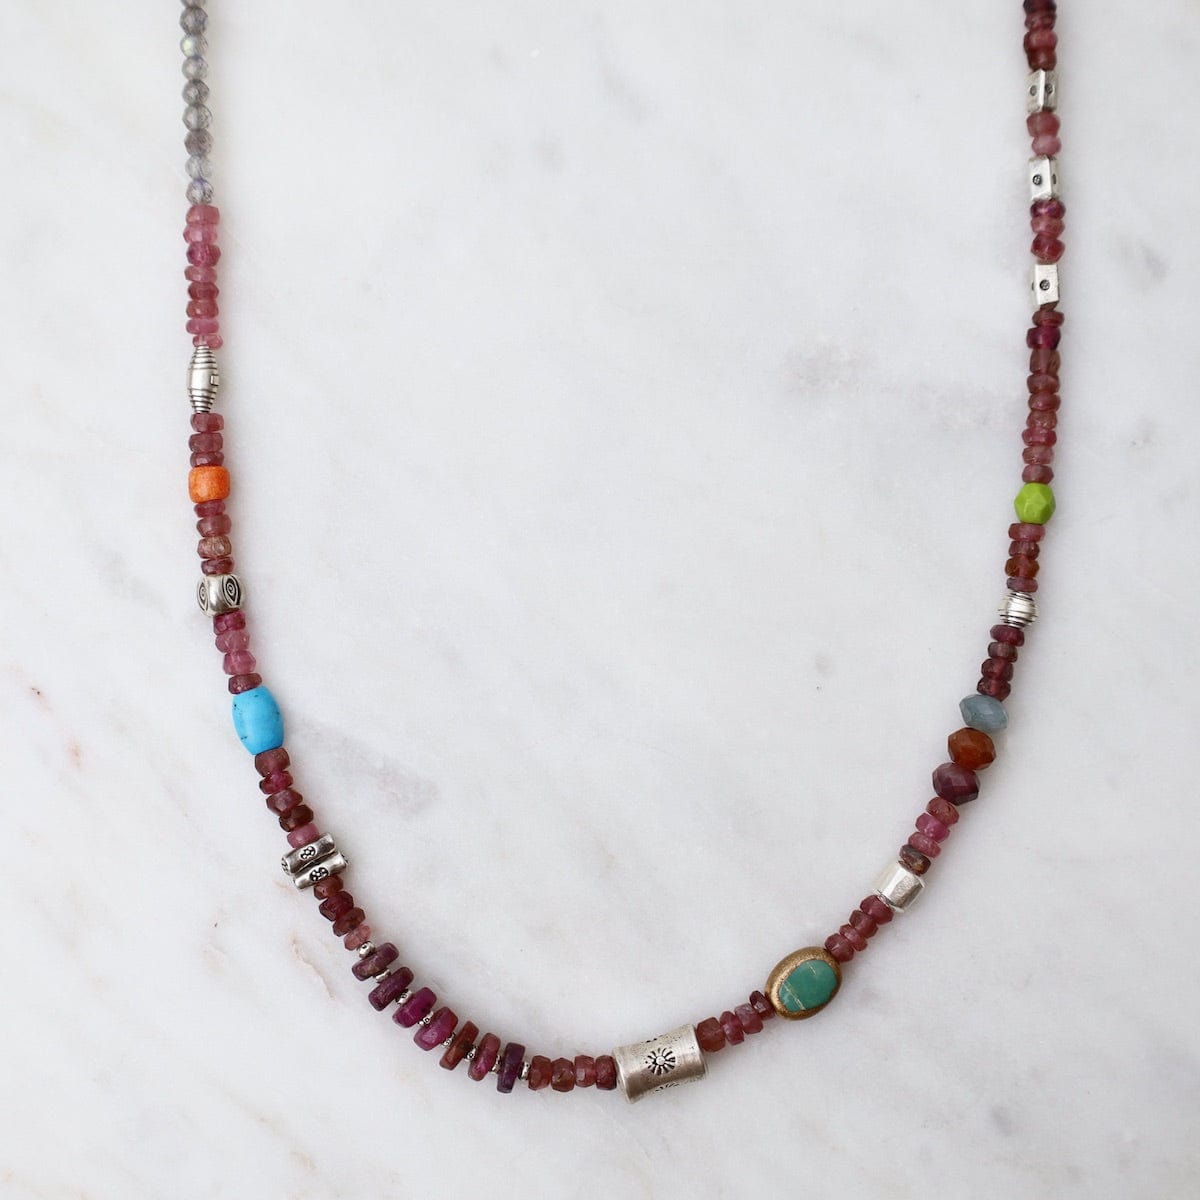 NKL Great Barrier Reef Necklace in Pink Tourmaline